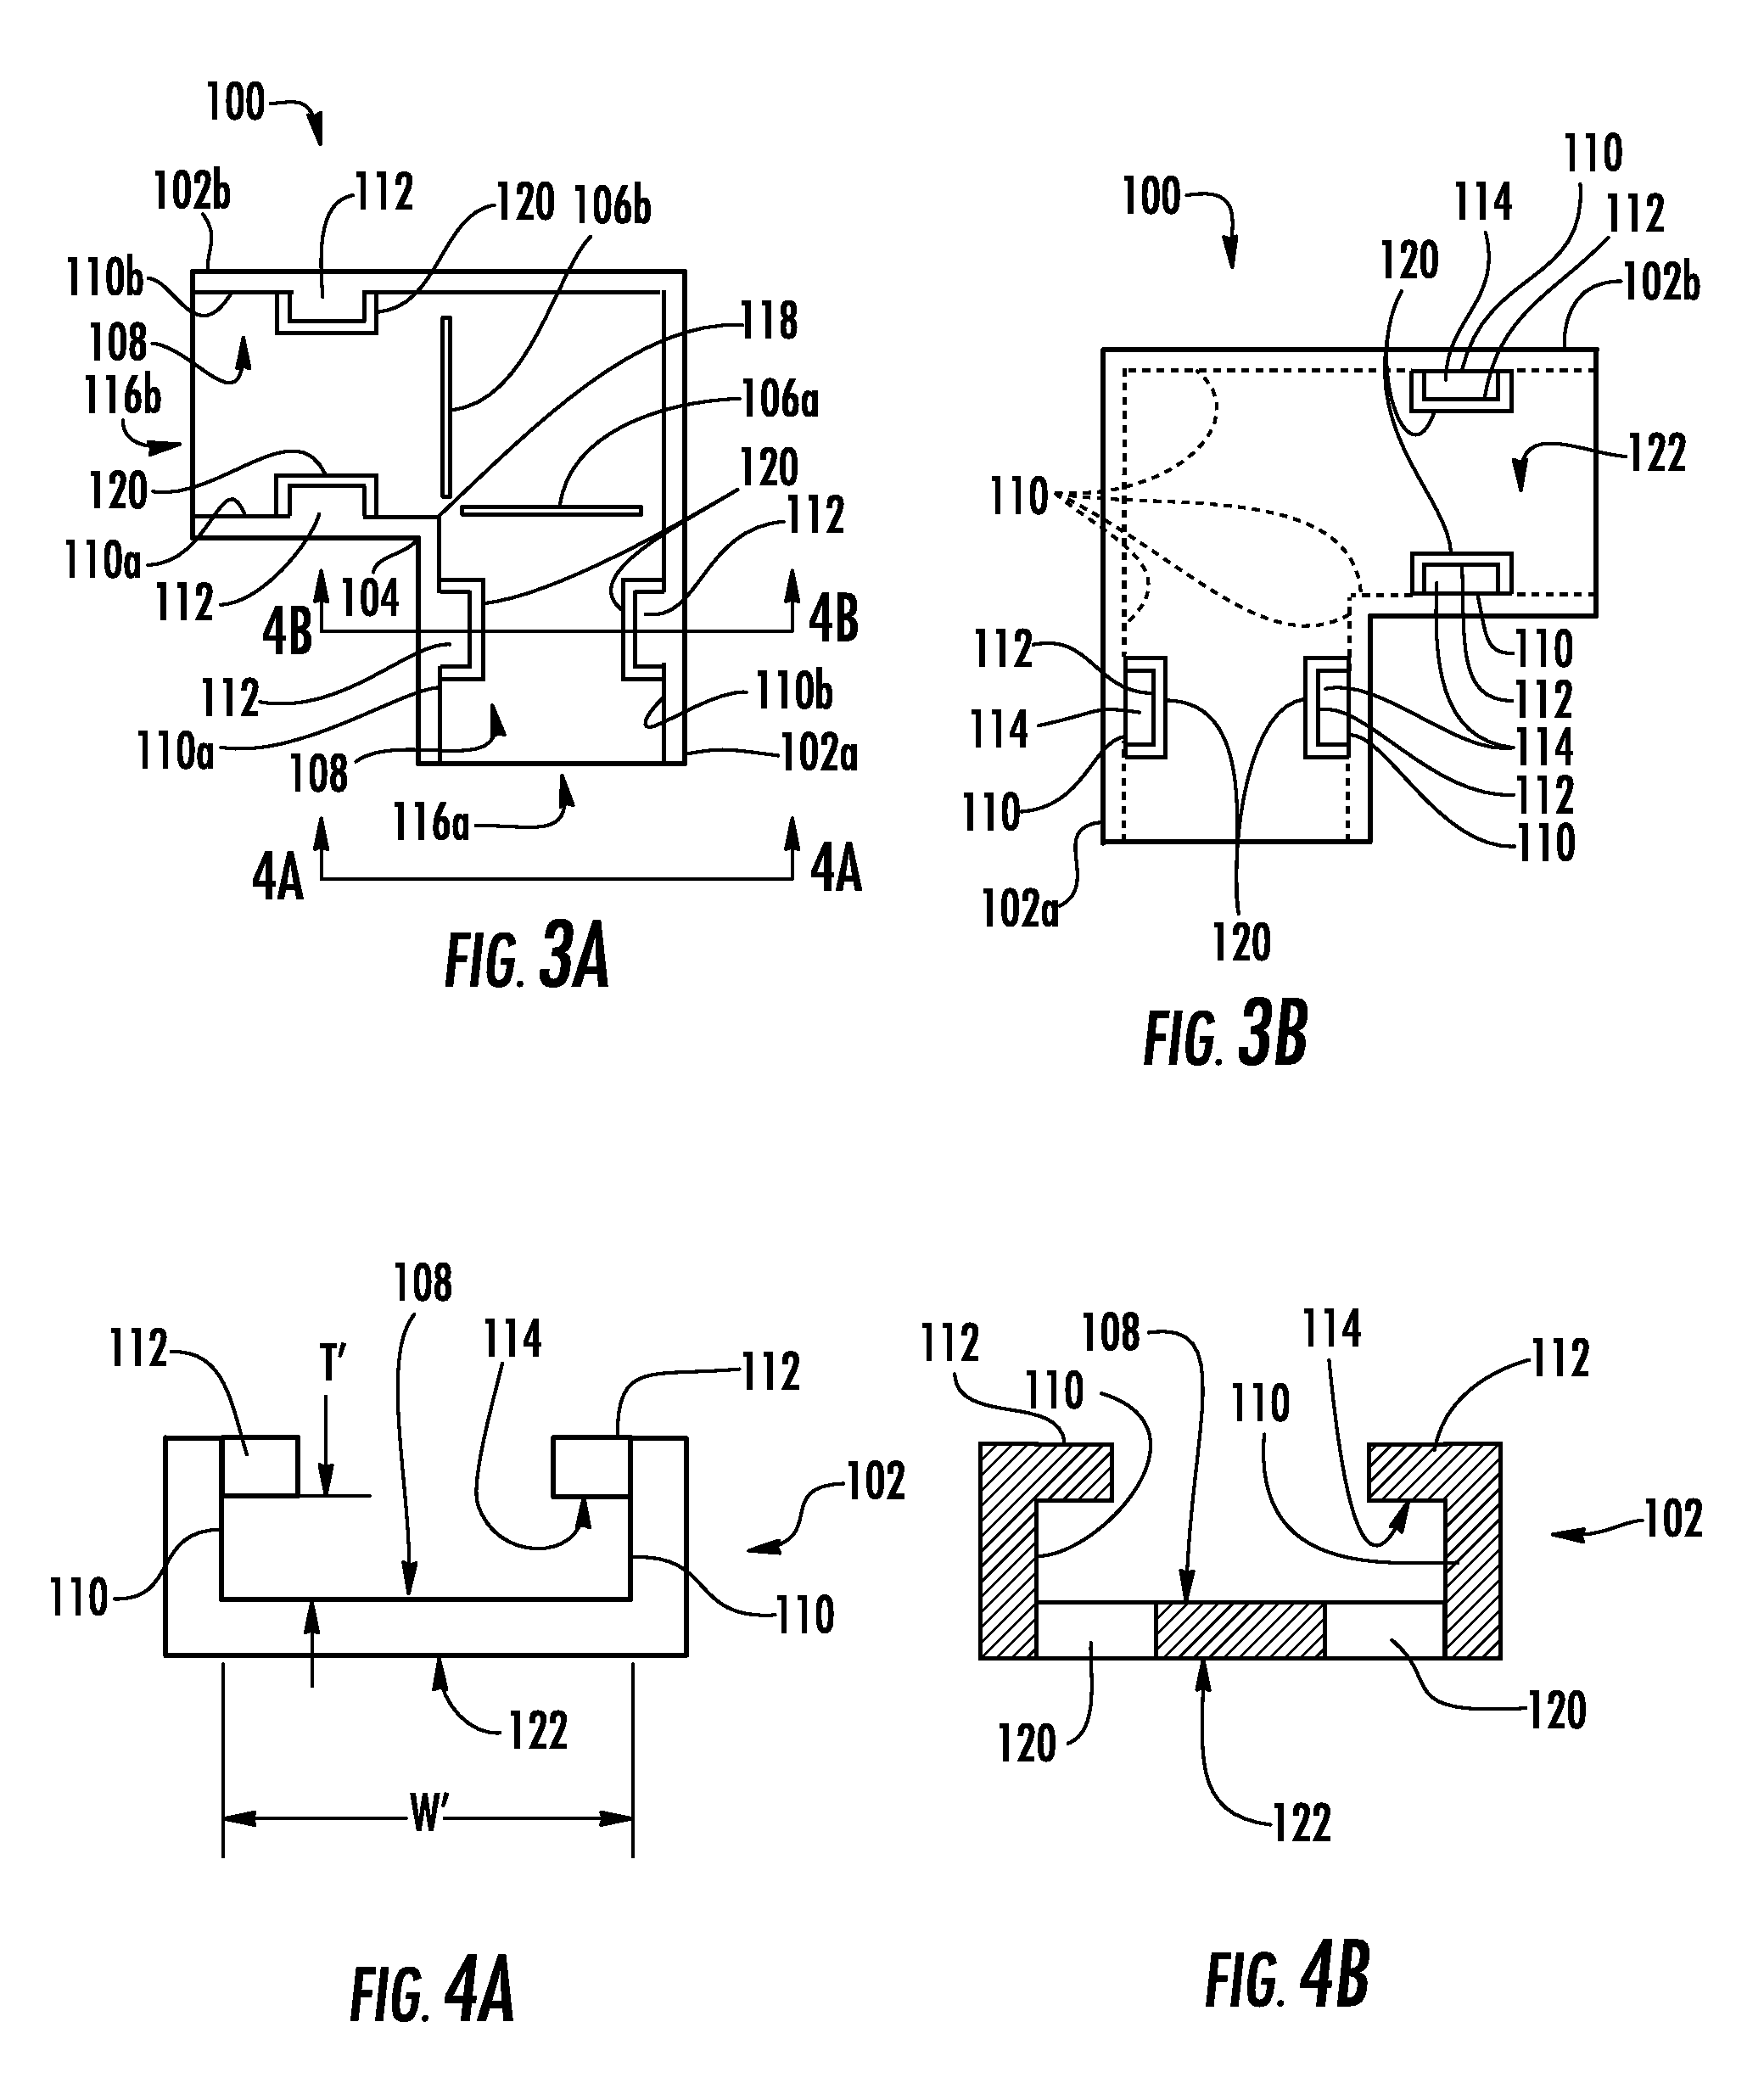 Scale coupling system